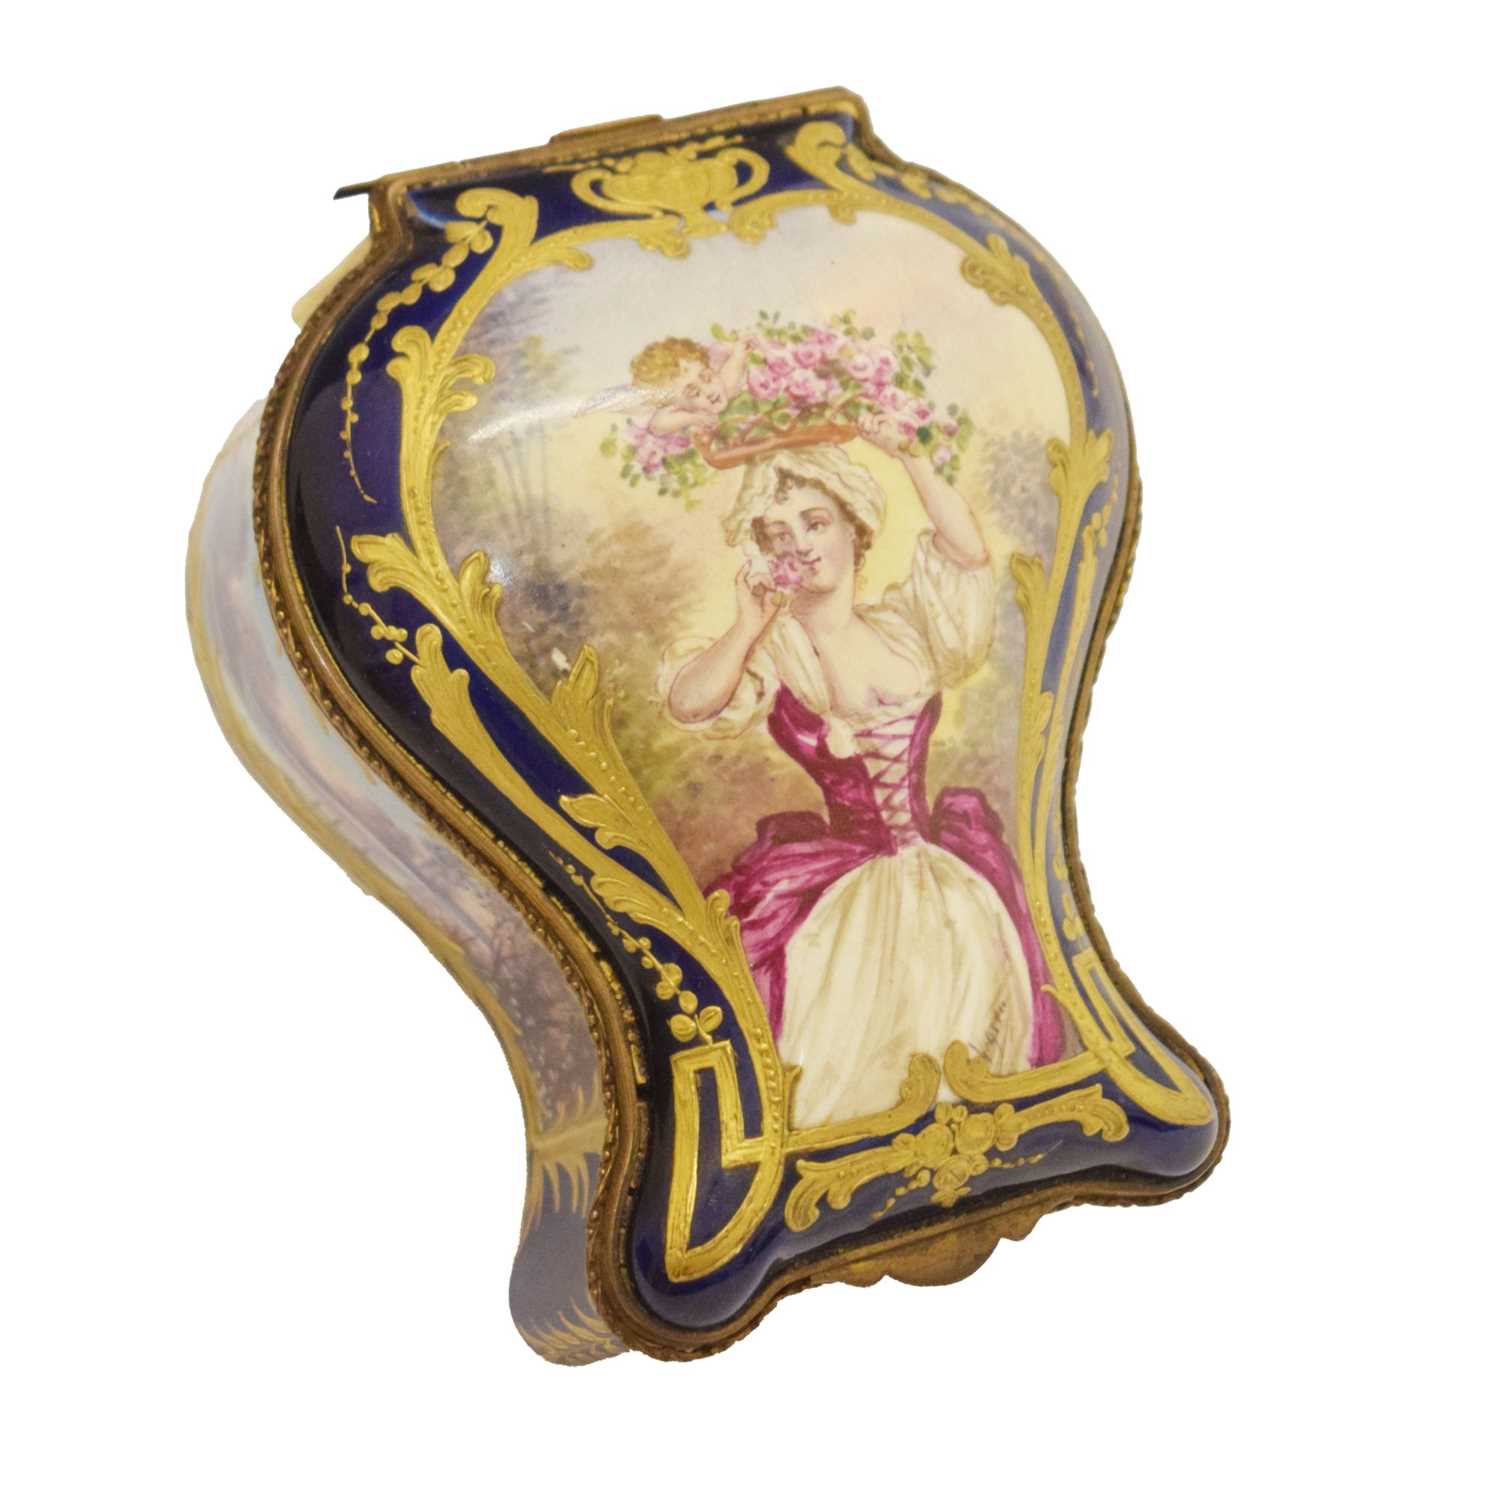 18th century-style porcelain and gilt metal box